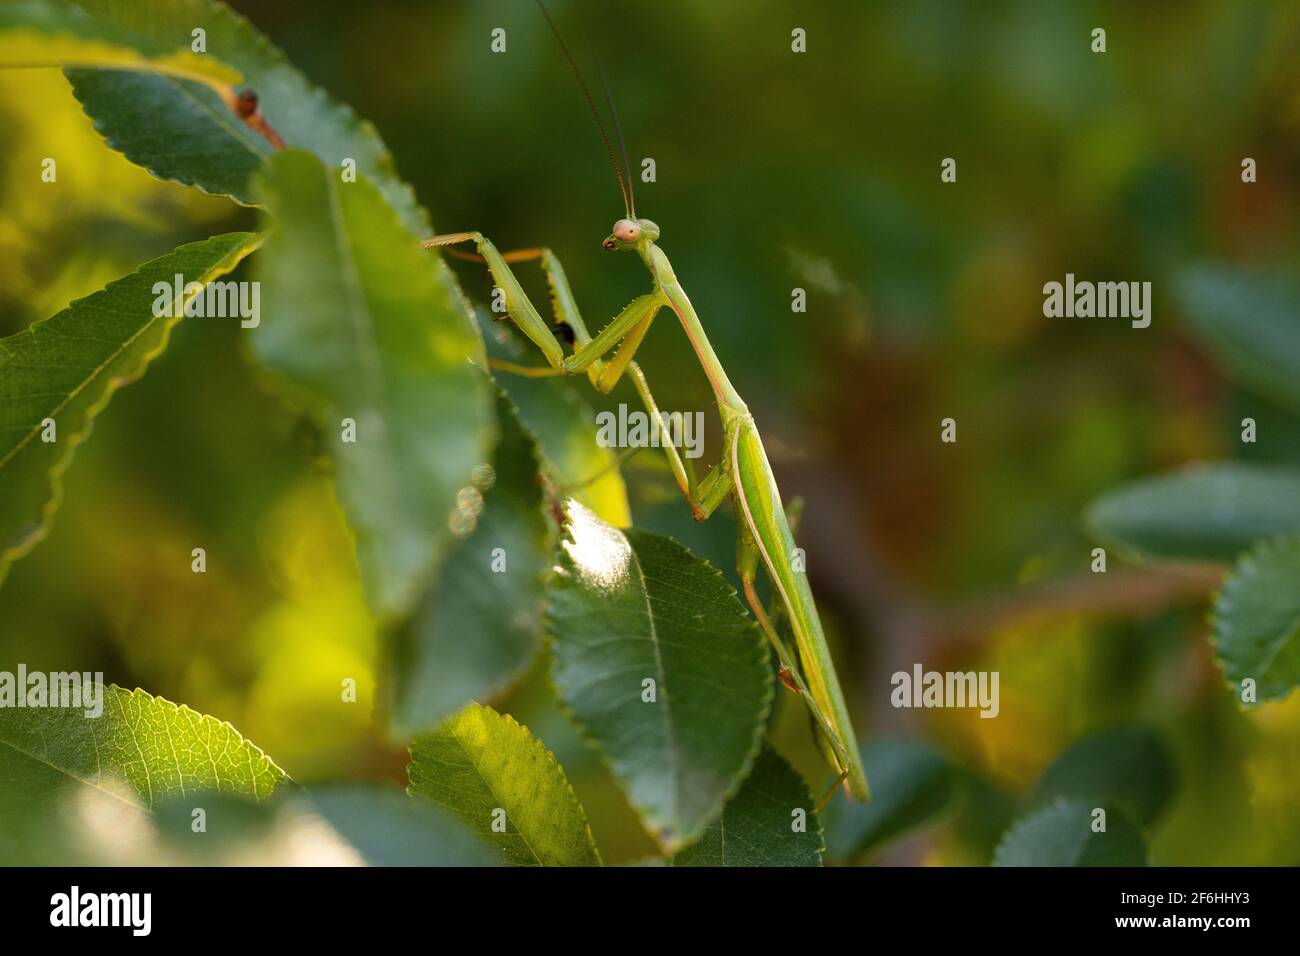 Green Praying Mantis on a leaf in a tree Stock Photo